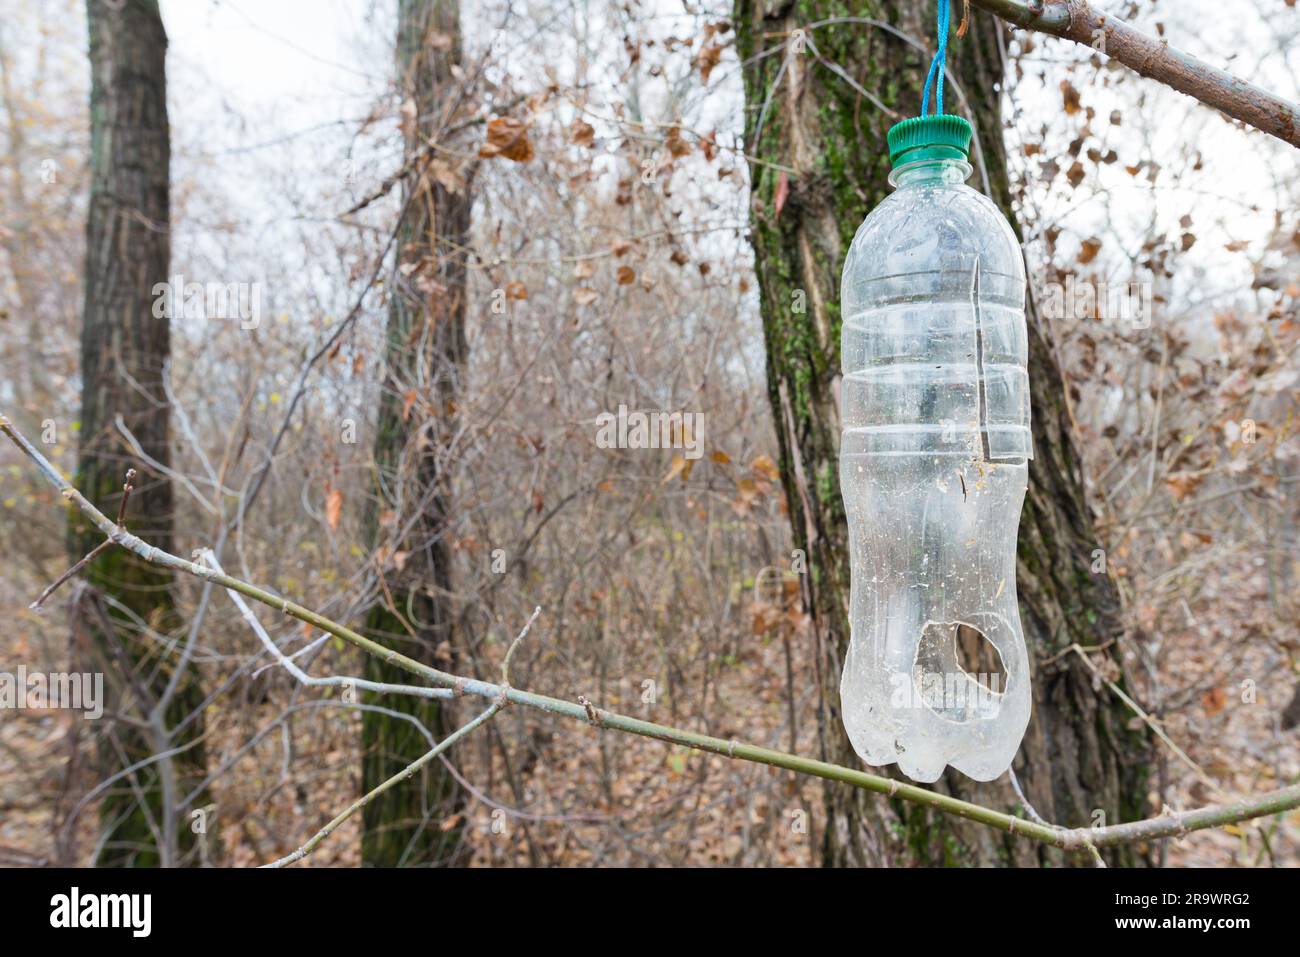 Plastic bottle, in the tree, used as feeder for birds in winter Stock Photo